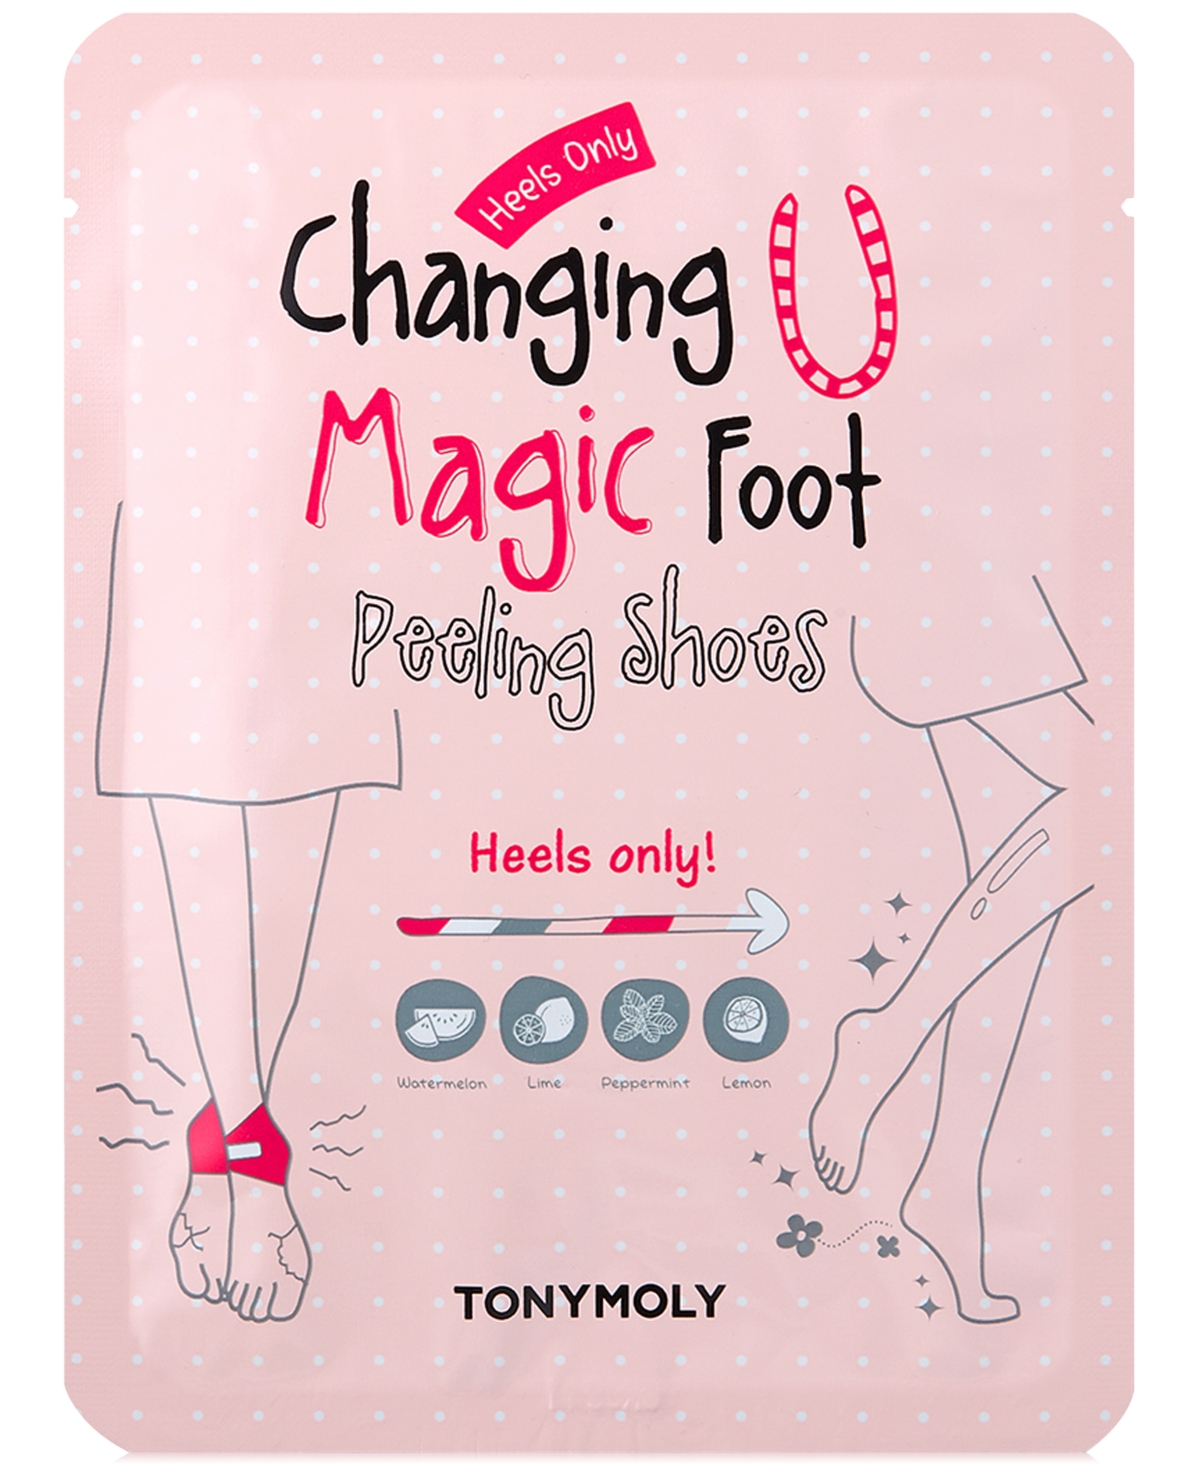 Tonymoly Changing U Magic Foot Peeling Shoes - Heels Only In No Color